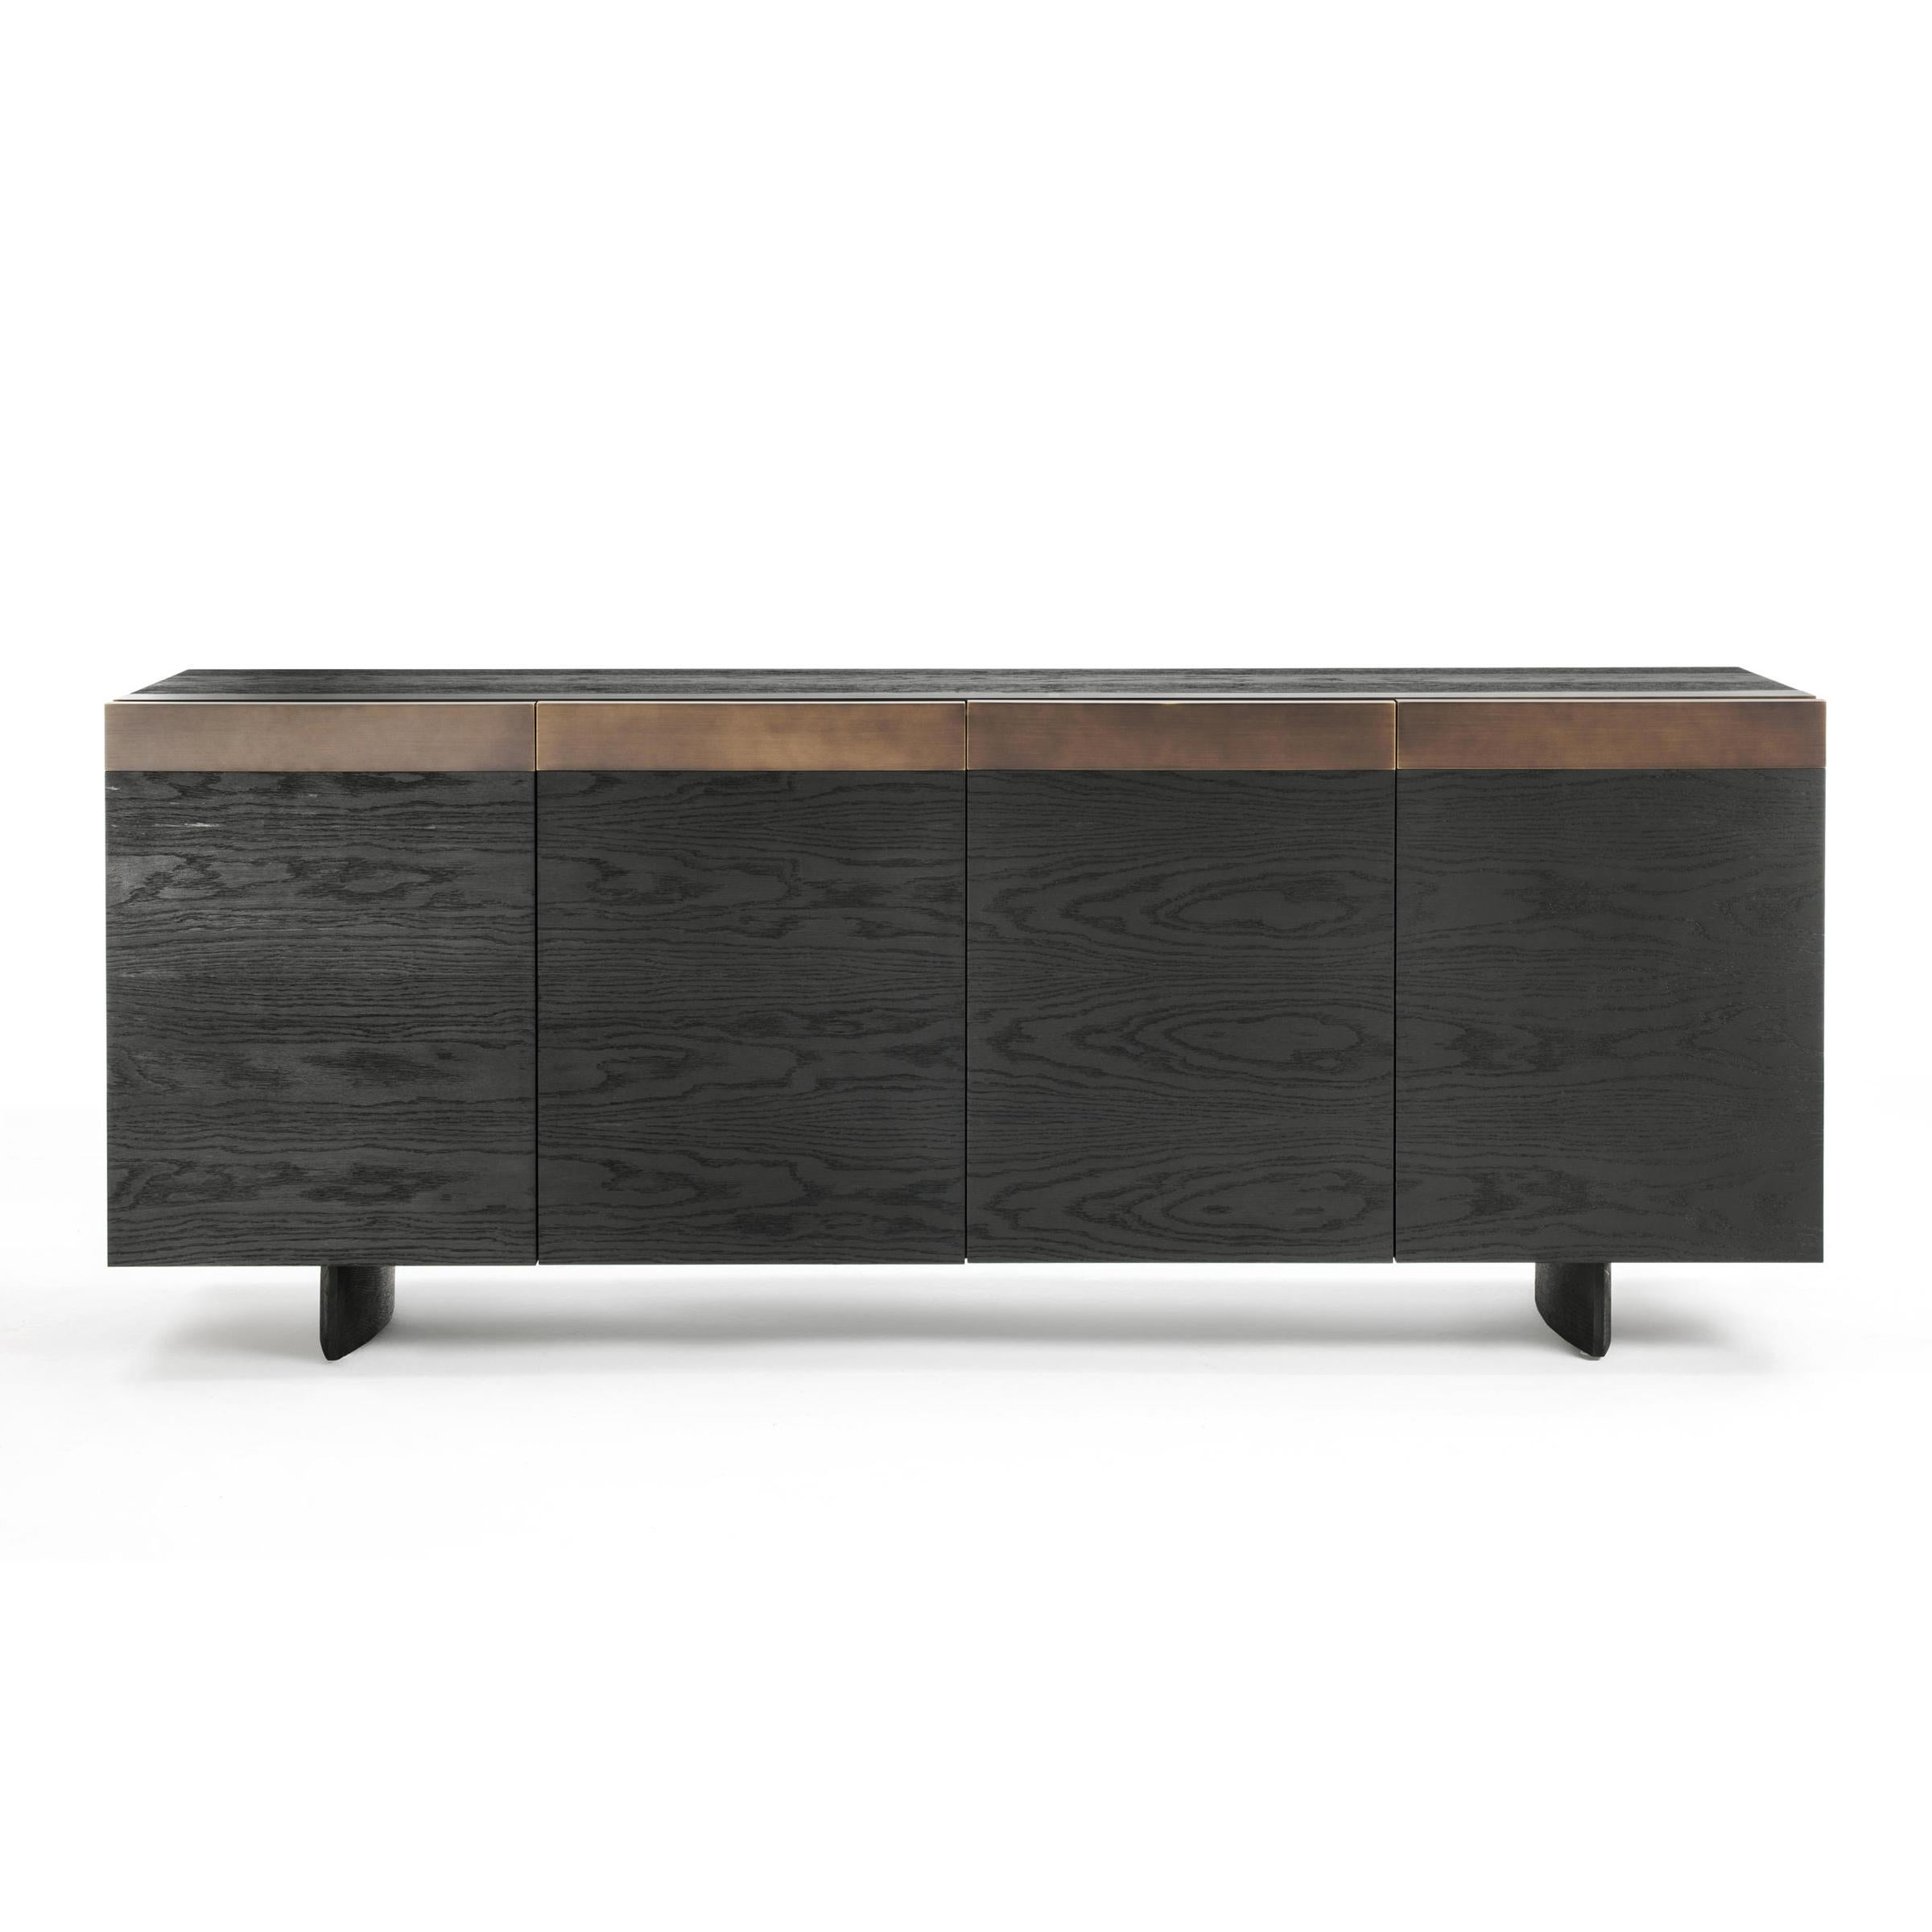 Sideboard all oak black with structure
in solid oak, black pigmented. With steel
details in antique bronze finish. With 4 doors
and 2 central drawers inside. Treated solid 
wood with wax with natural pine extracts.
Also available in walnut, or